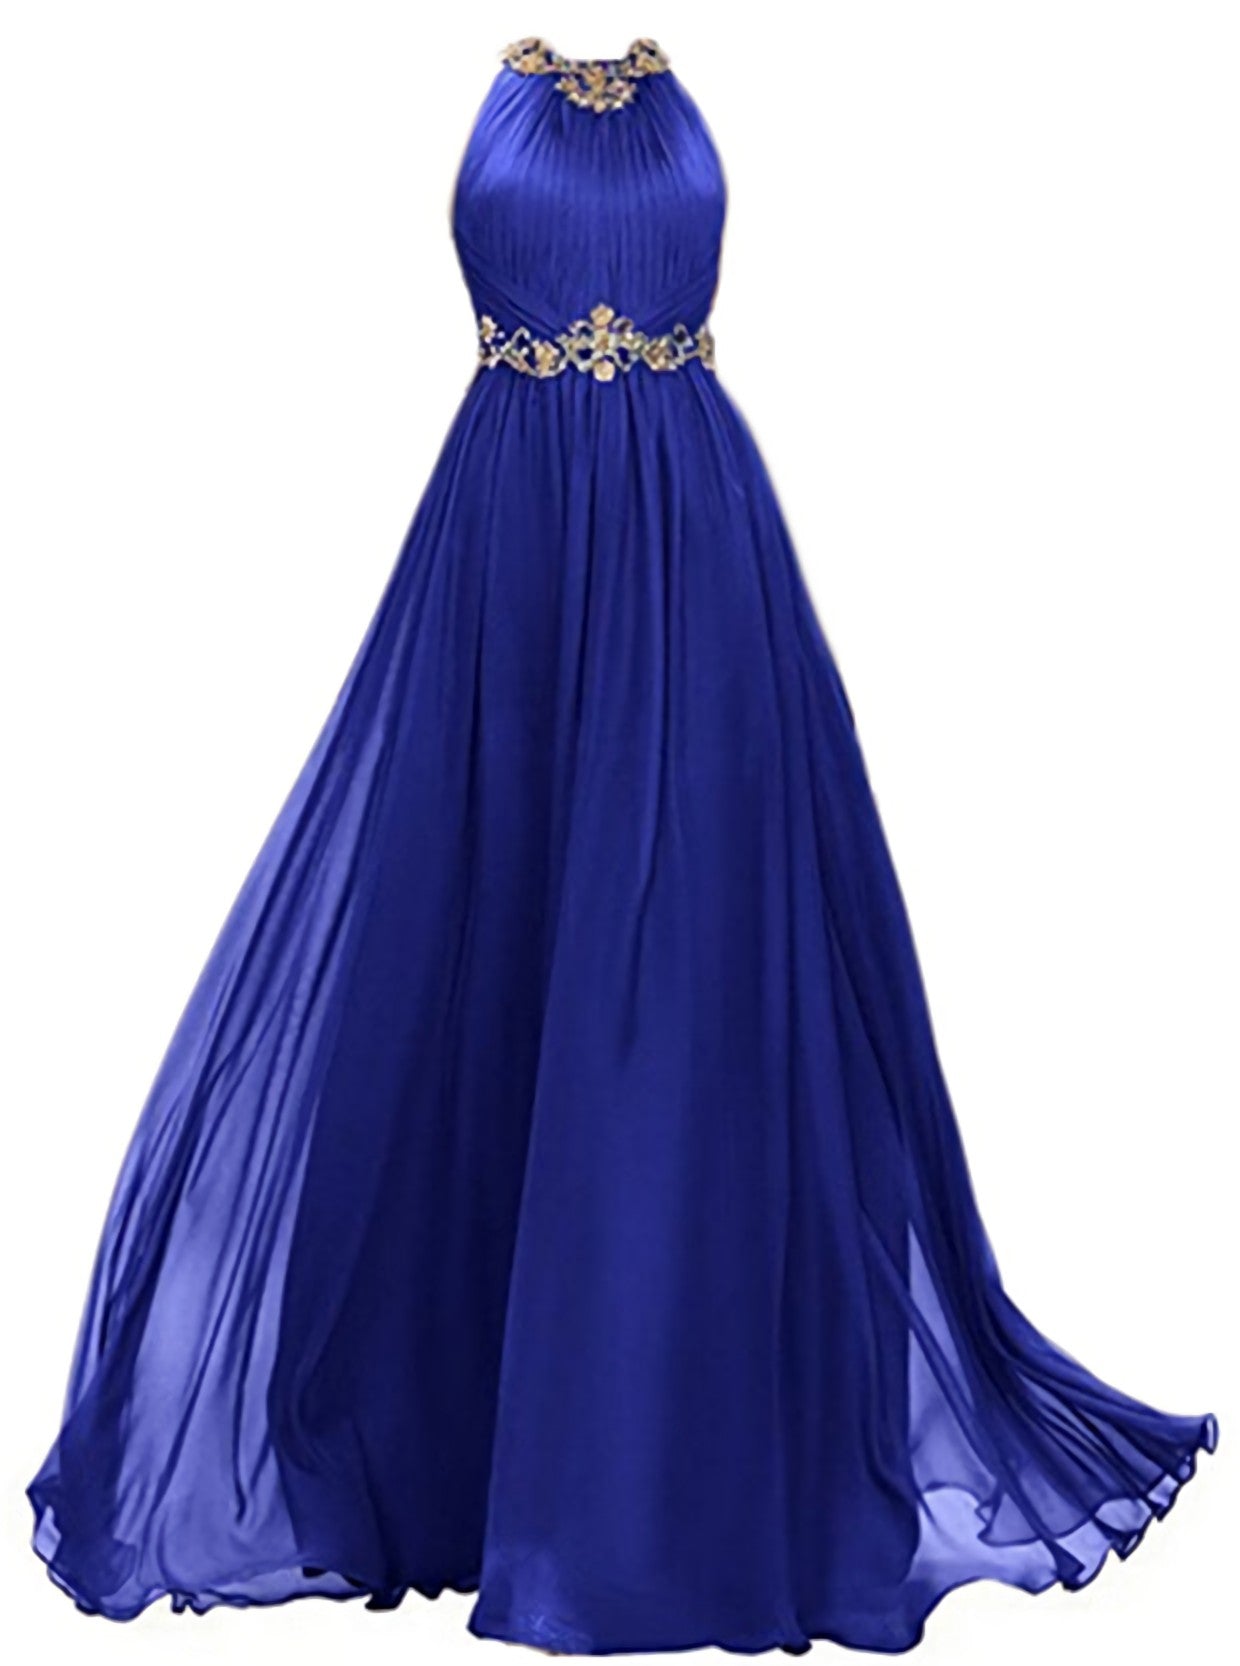 Evening Dress For Weddings, Womens Chiffon Beaded Prom Dress, Jewel Long Evening Dress, A Line Prom Gown With Gold Belt